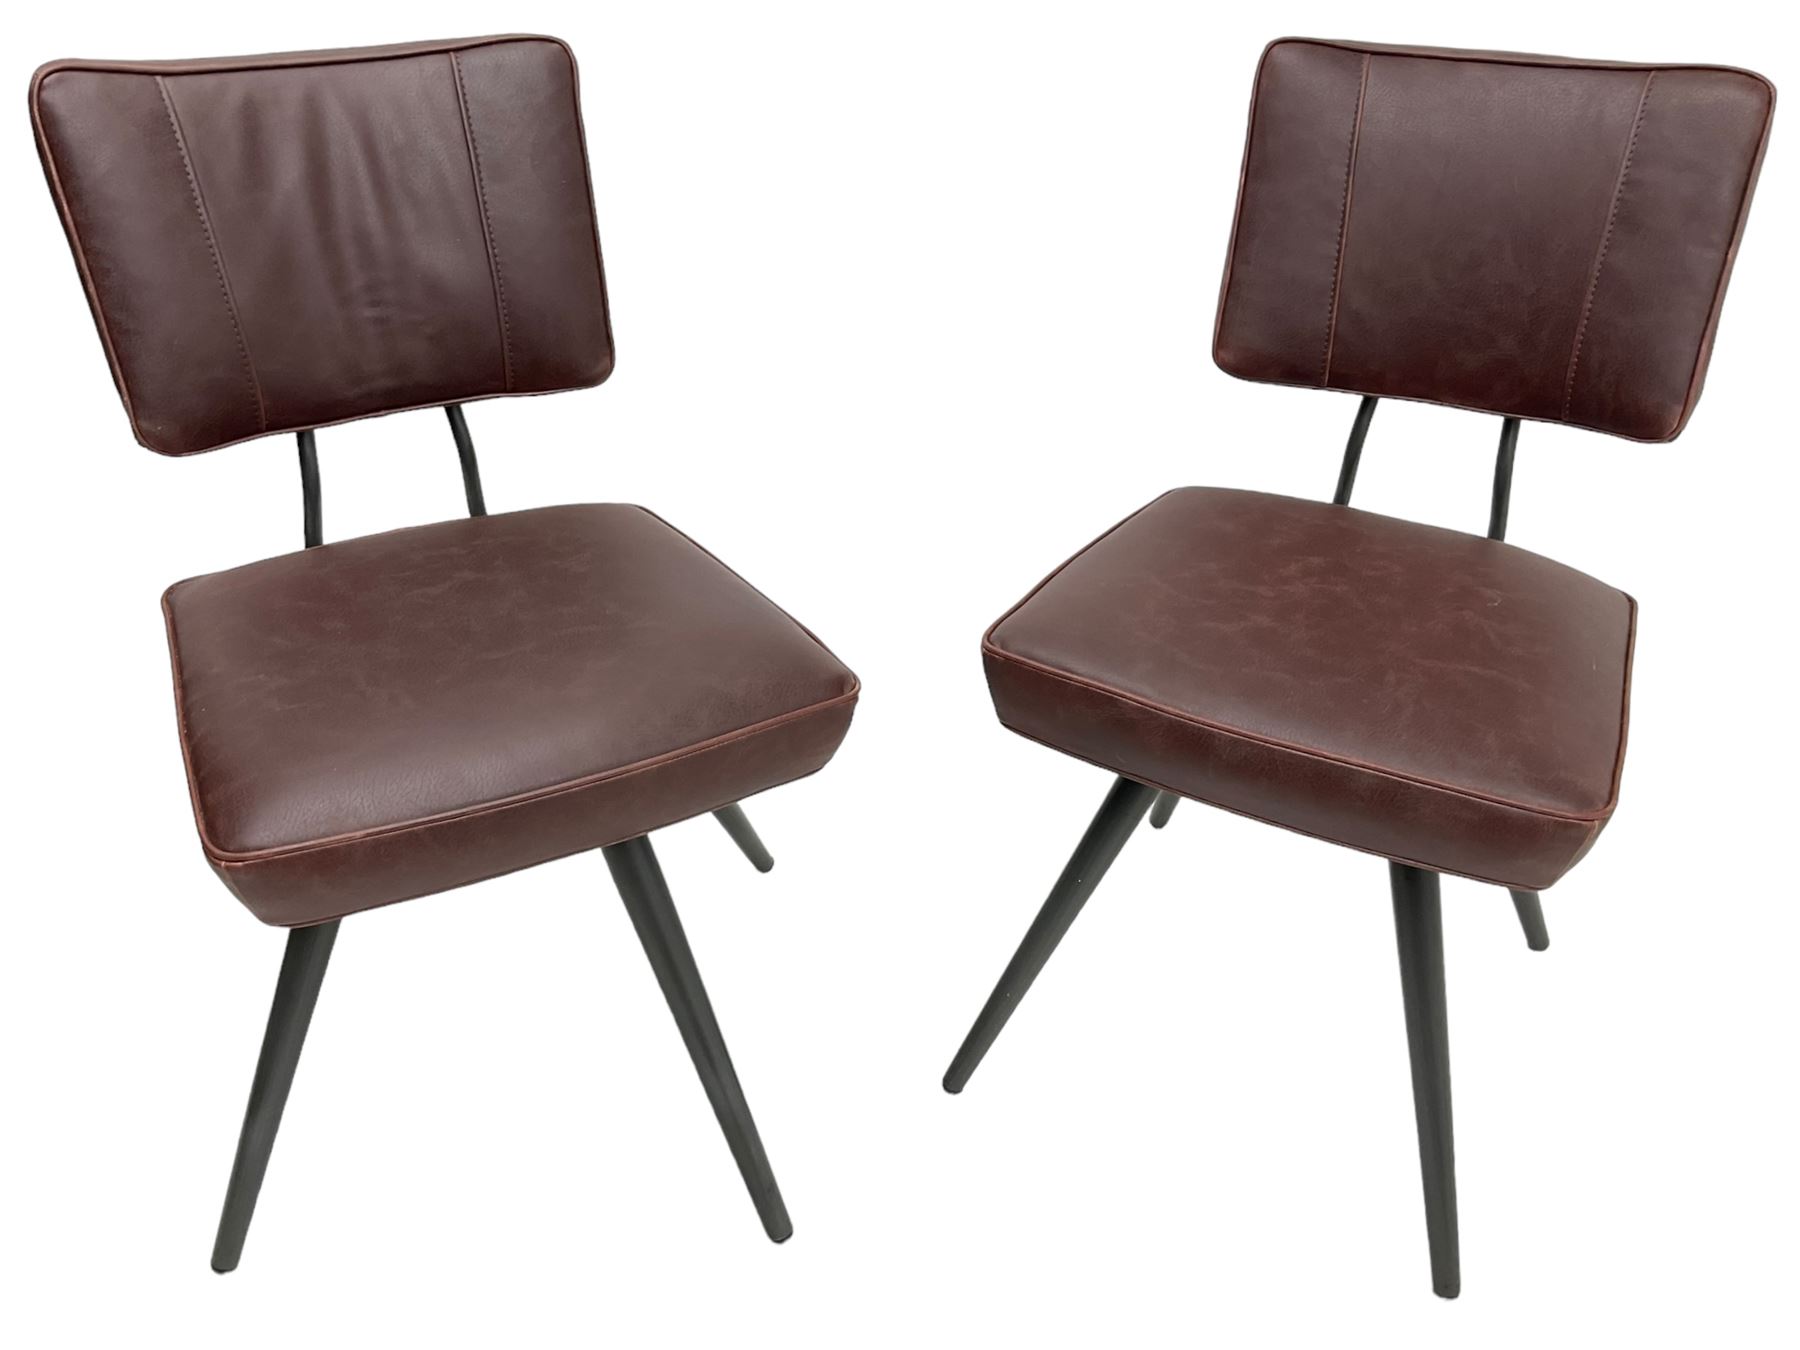 Barker & Stonehouse - pair of 'Sawyer' swivel dining chairs - Image 2 of 4